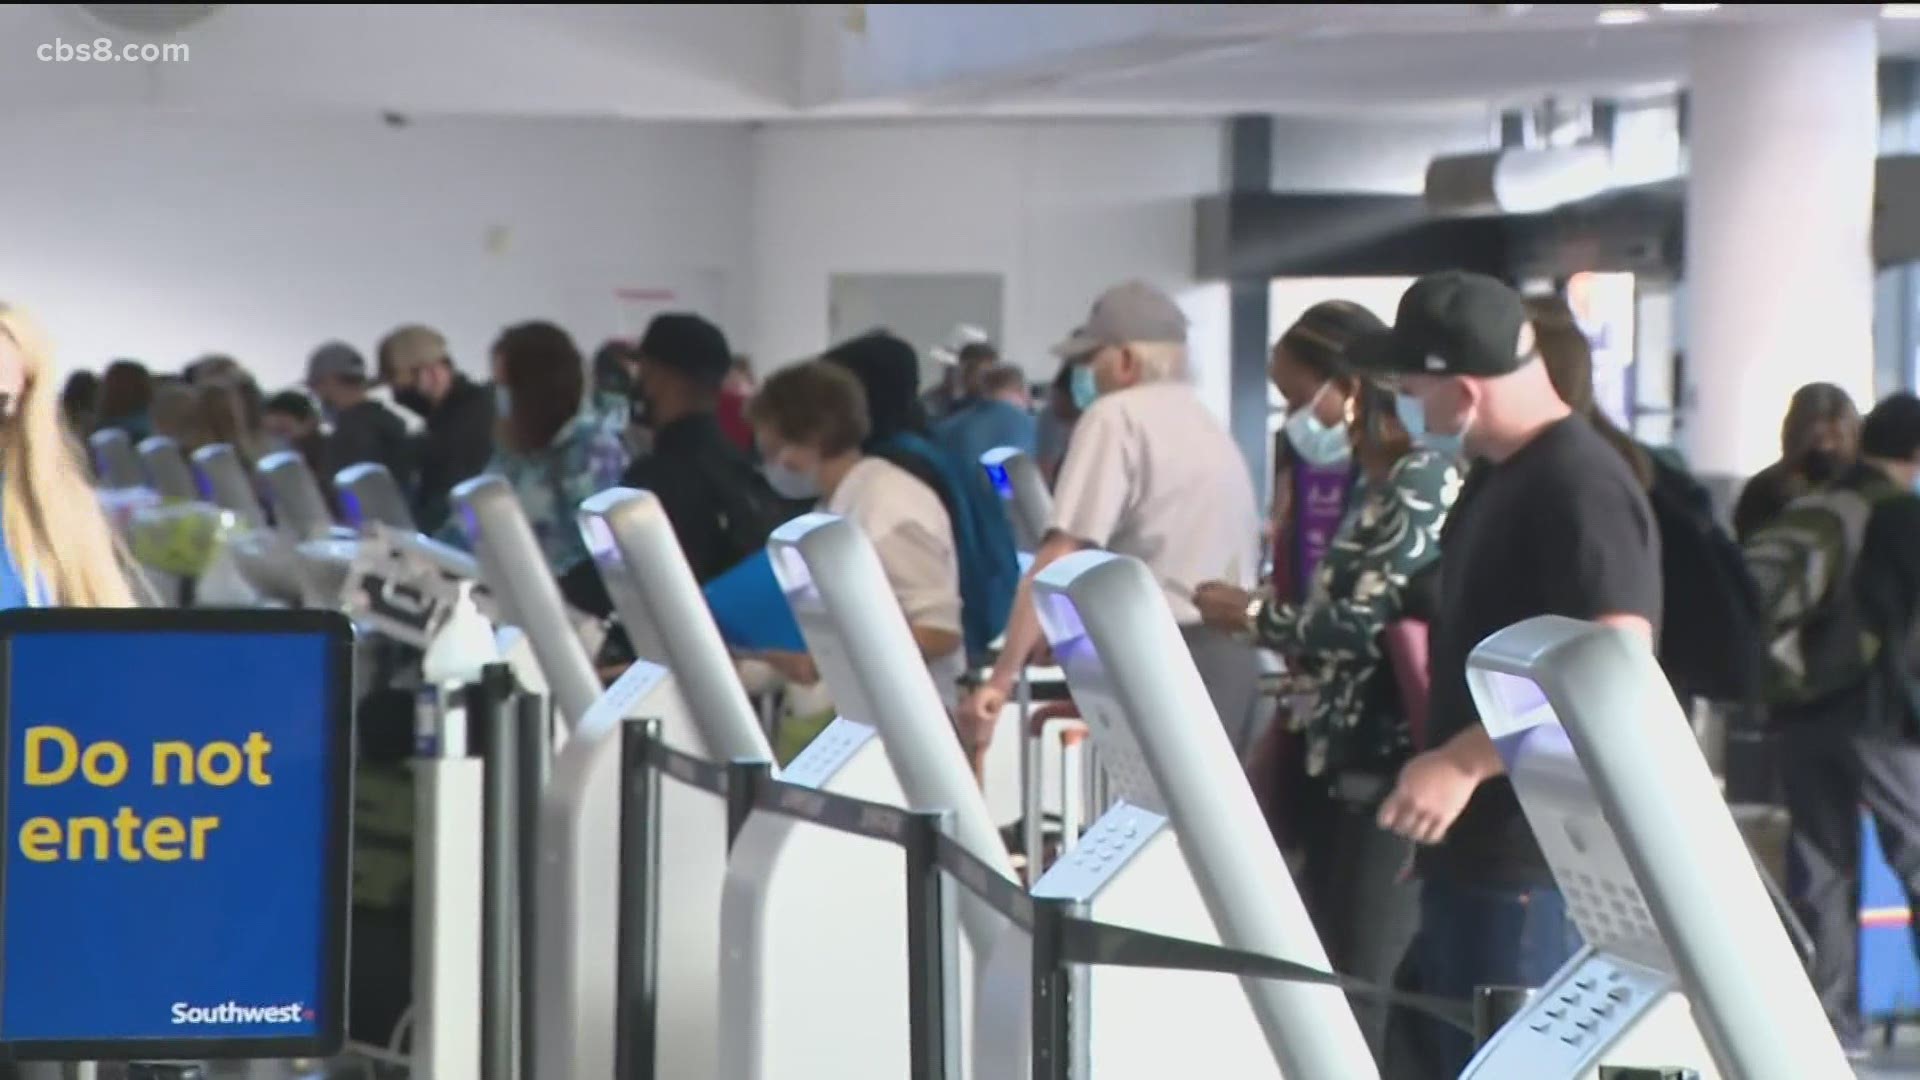 The Transportation Security Administration says nationwide Sunday had nearly 2 million travelers. In comparison to last year on June 13 which had 430,000 travelers.